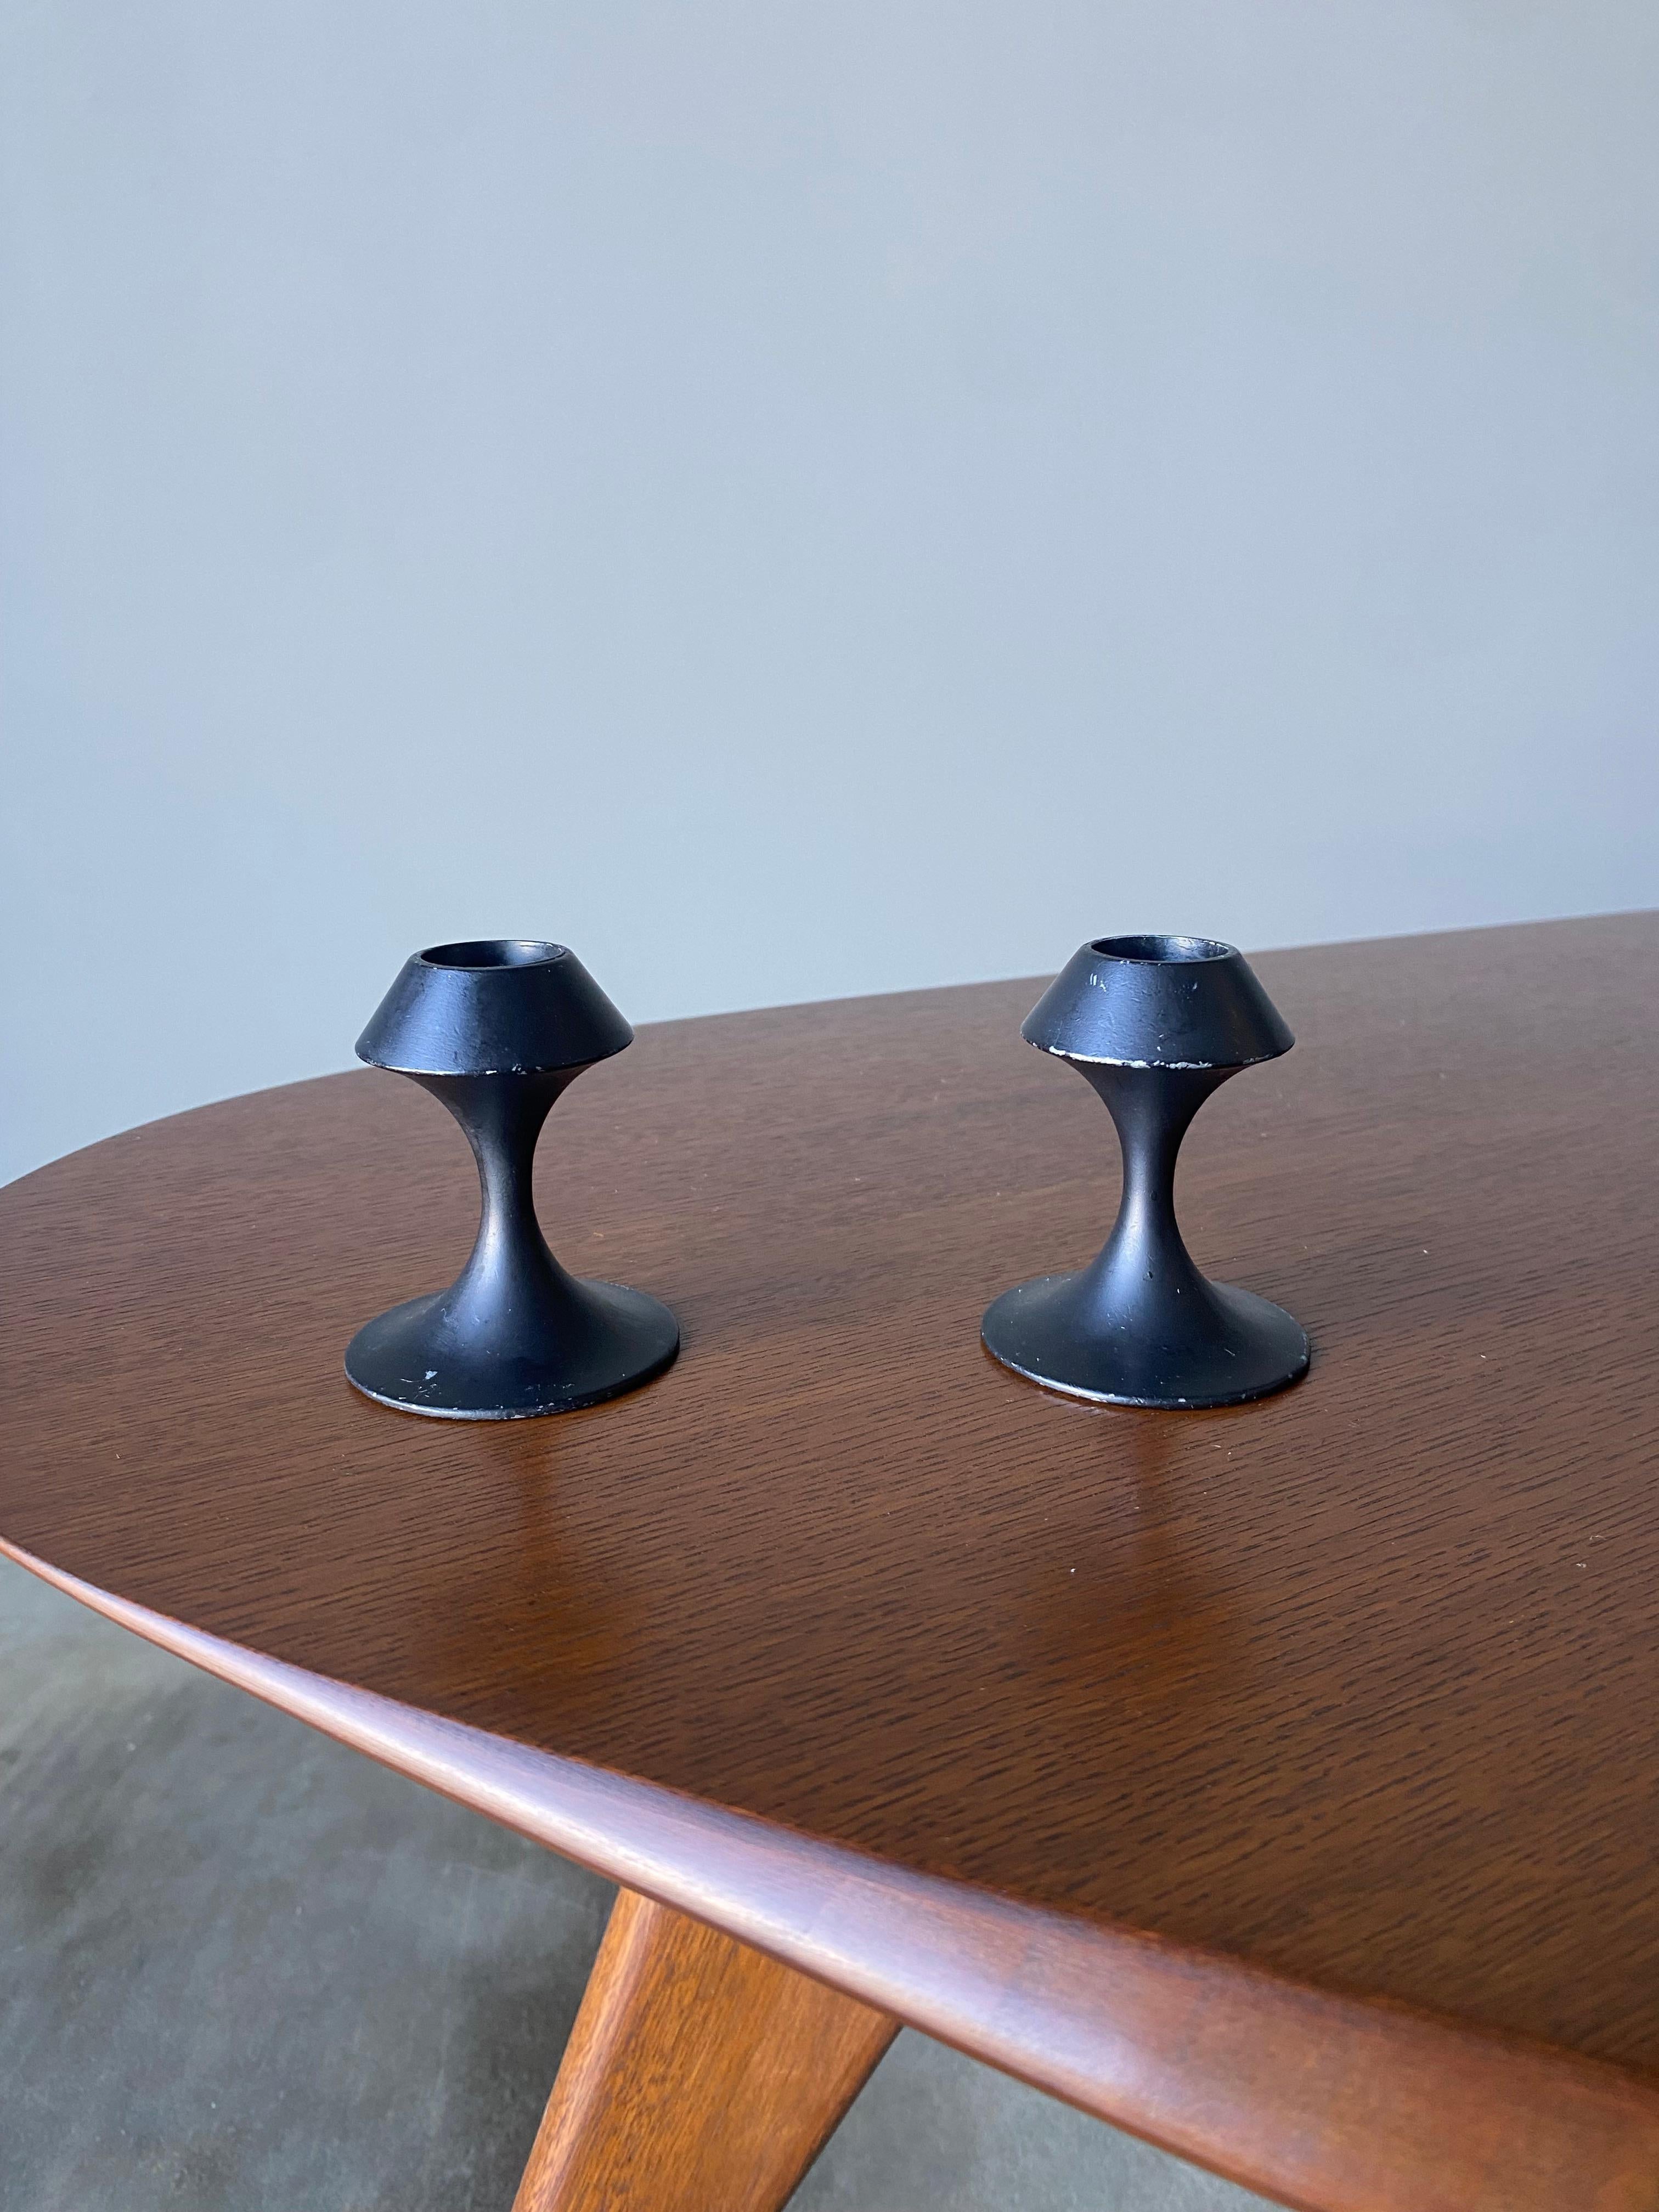 Modernist Candle Holders Designed By Lenox In Good Condition For Sale In Costa Mesa, CA